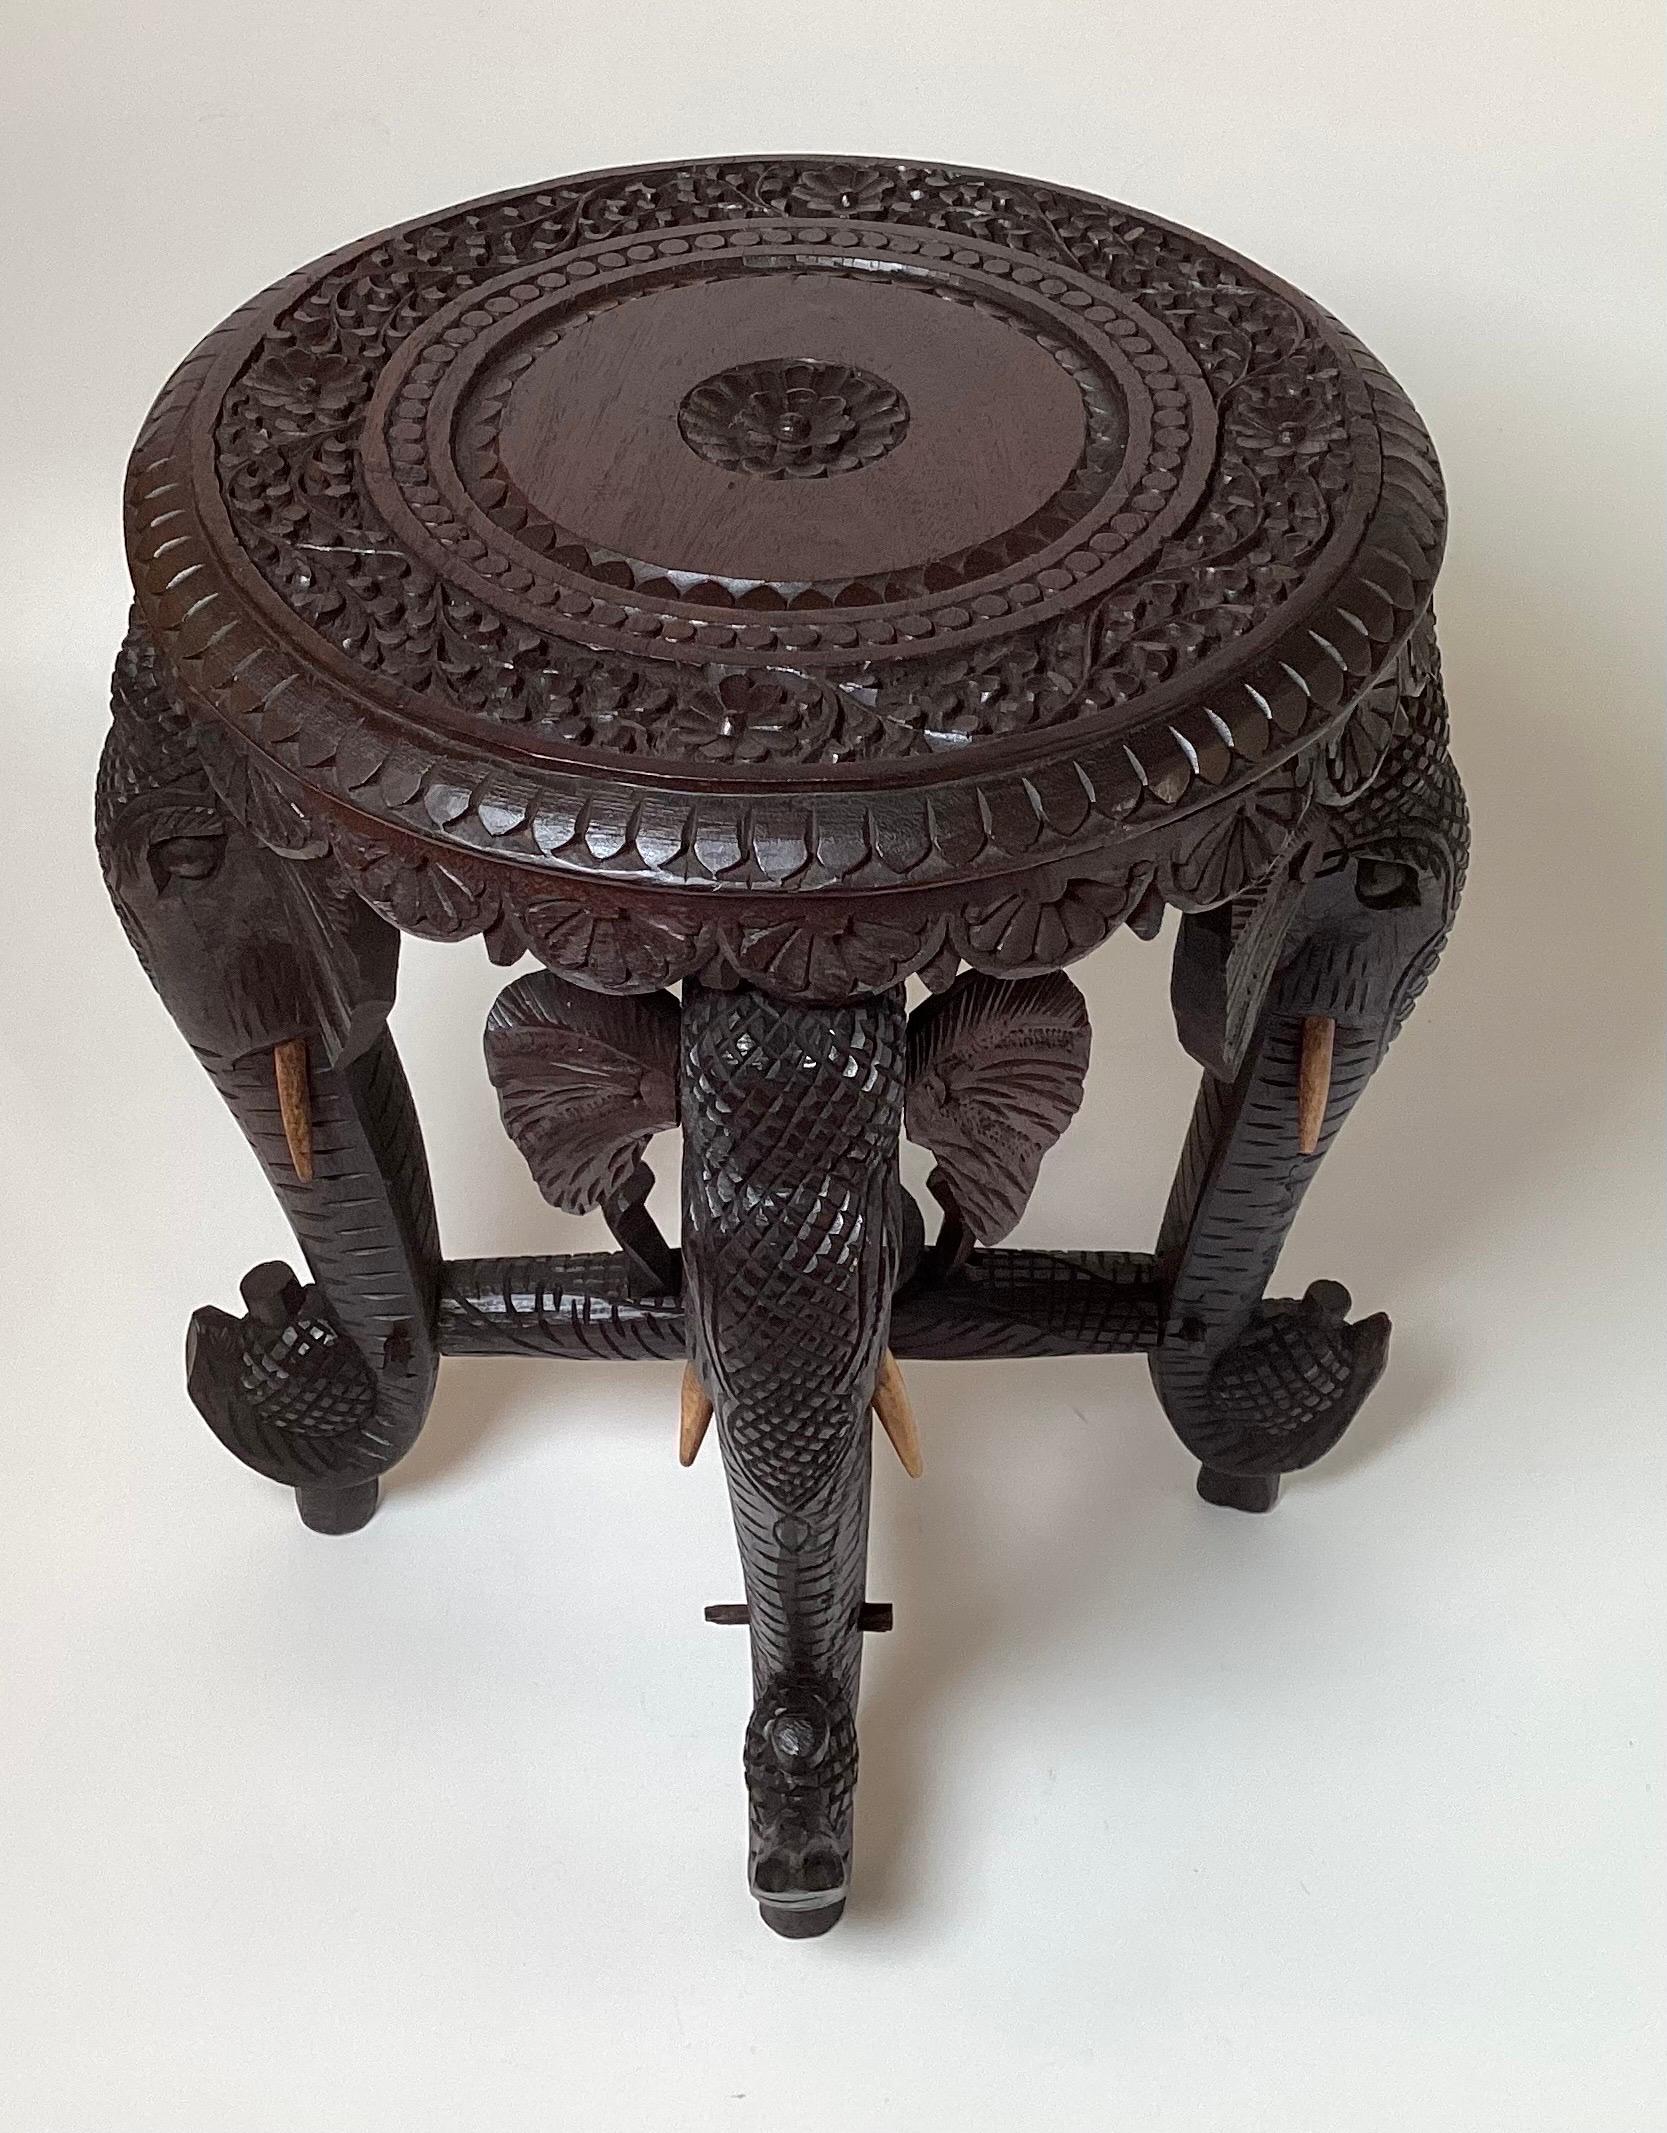 A 19th century hand carved elephant form round side table. The table is made using all pegged construction using no nails or screws the tusks are painted wood. The table stand is 18.5 inches tall, 17 inches wide, 17 inches deep at the widest point,